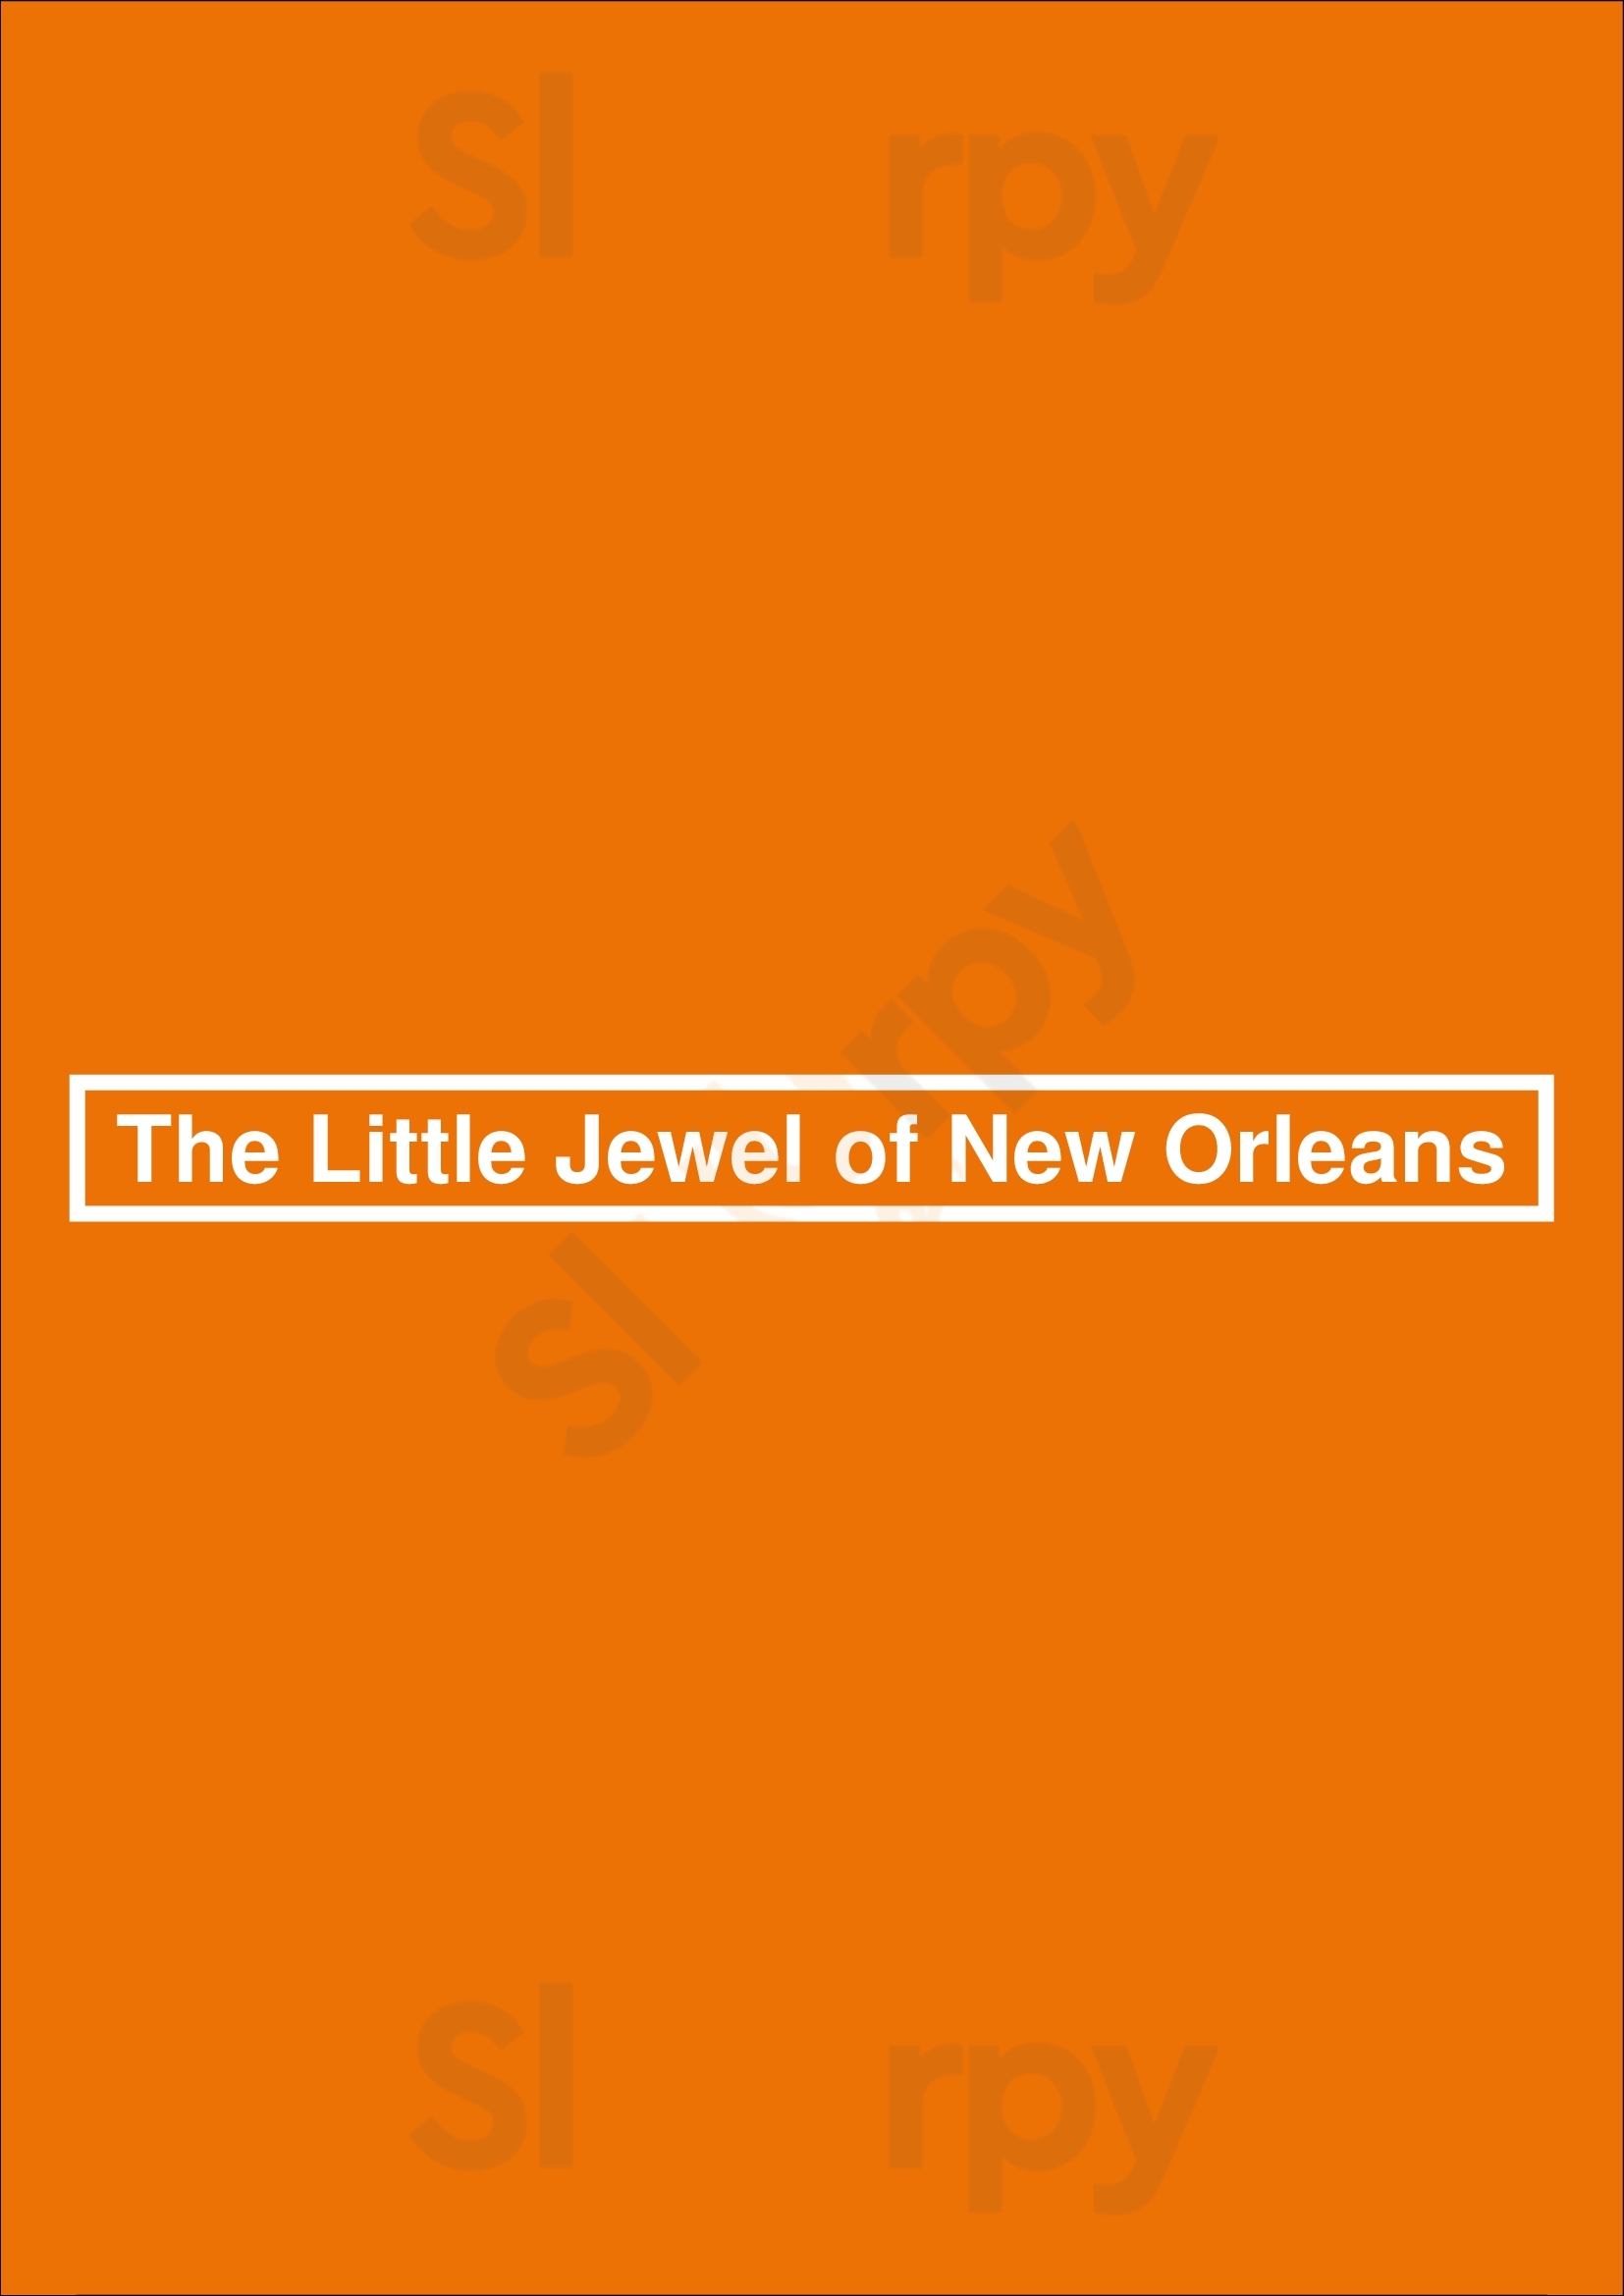 The Little Jewel Of New Orleans Los Angeles Menu - 1